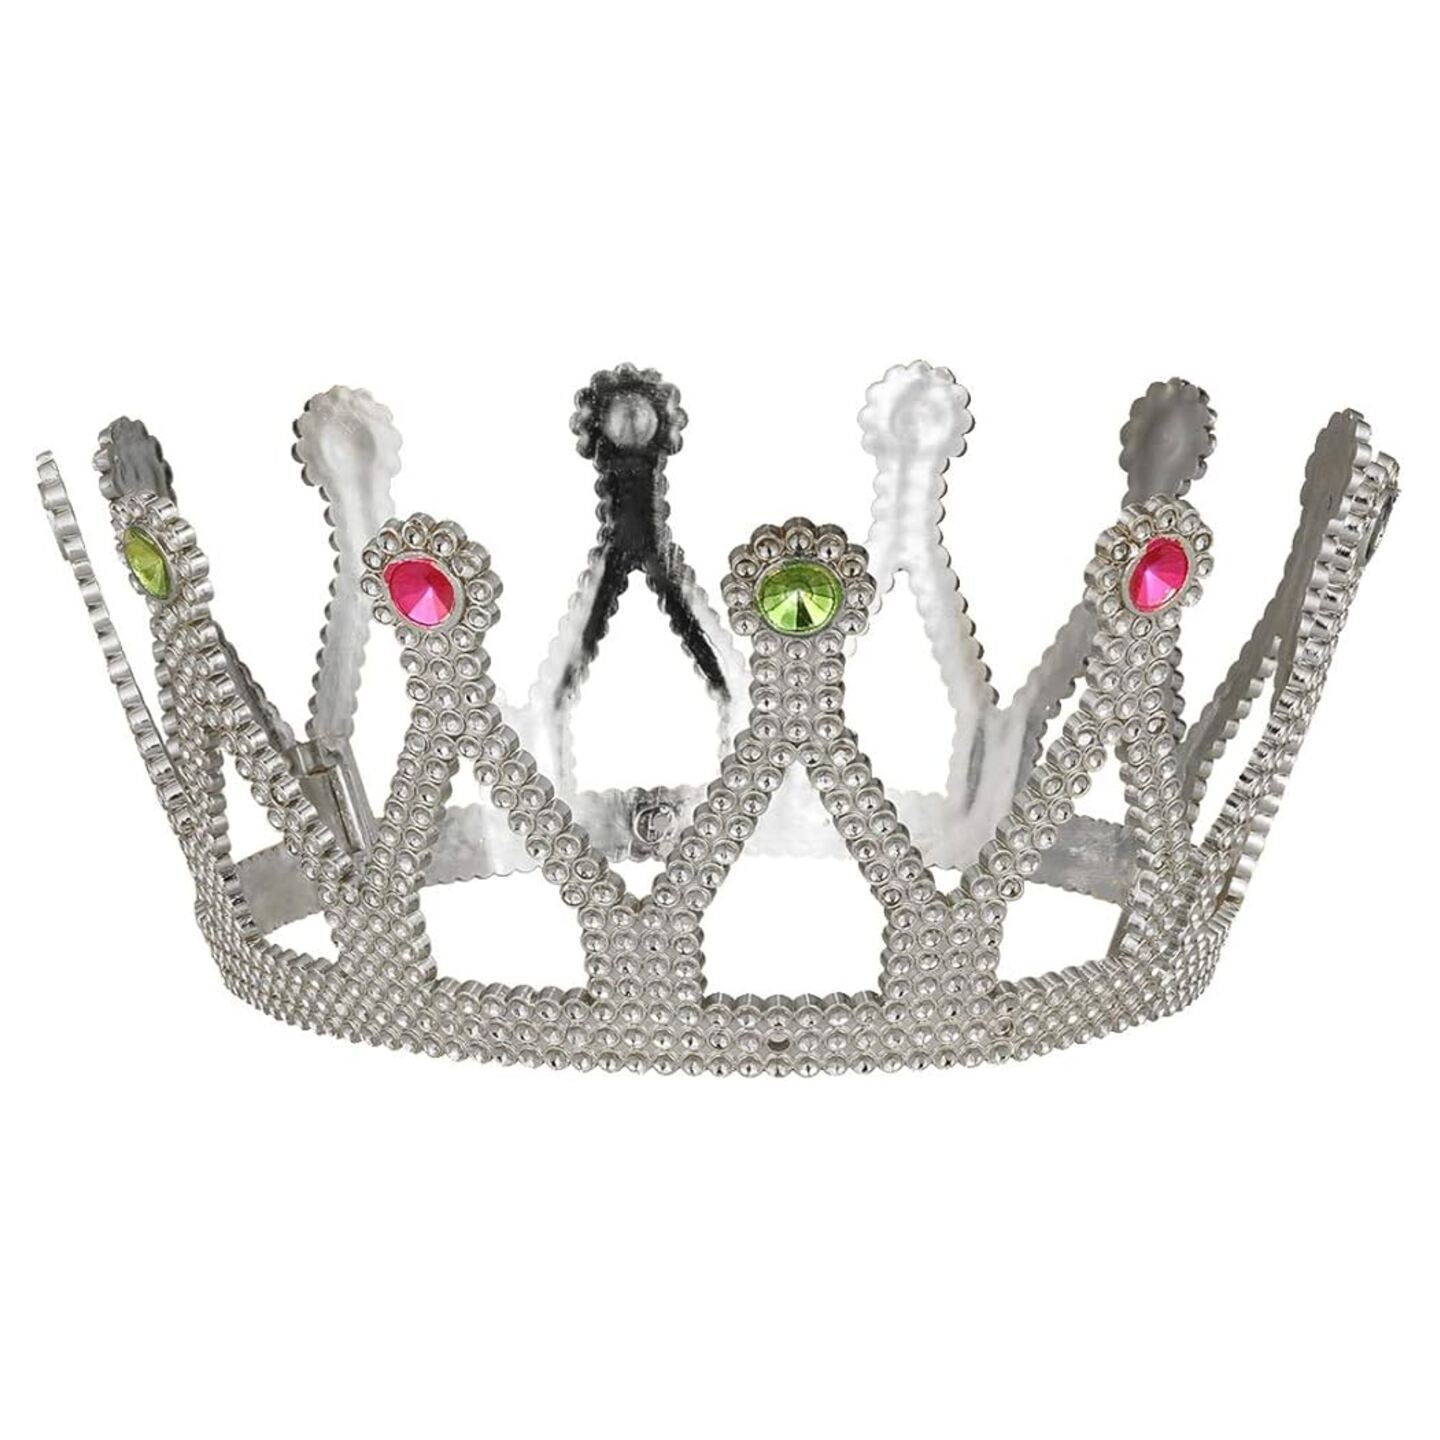 Queen Tiara Party Accessory for Cosplay Costume Party (Silver)